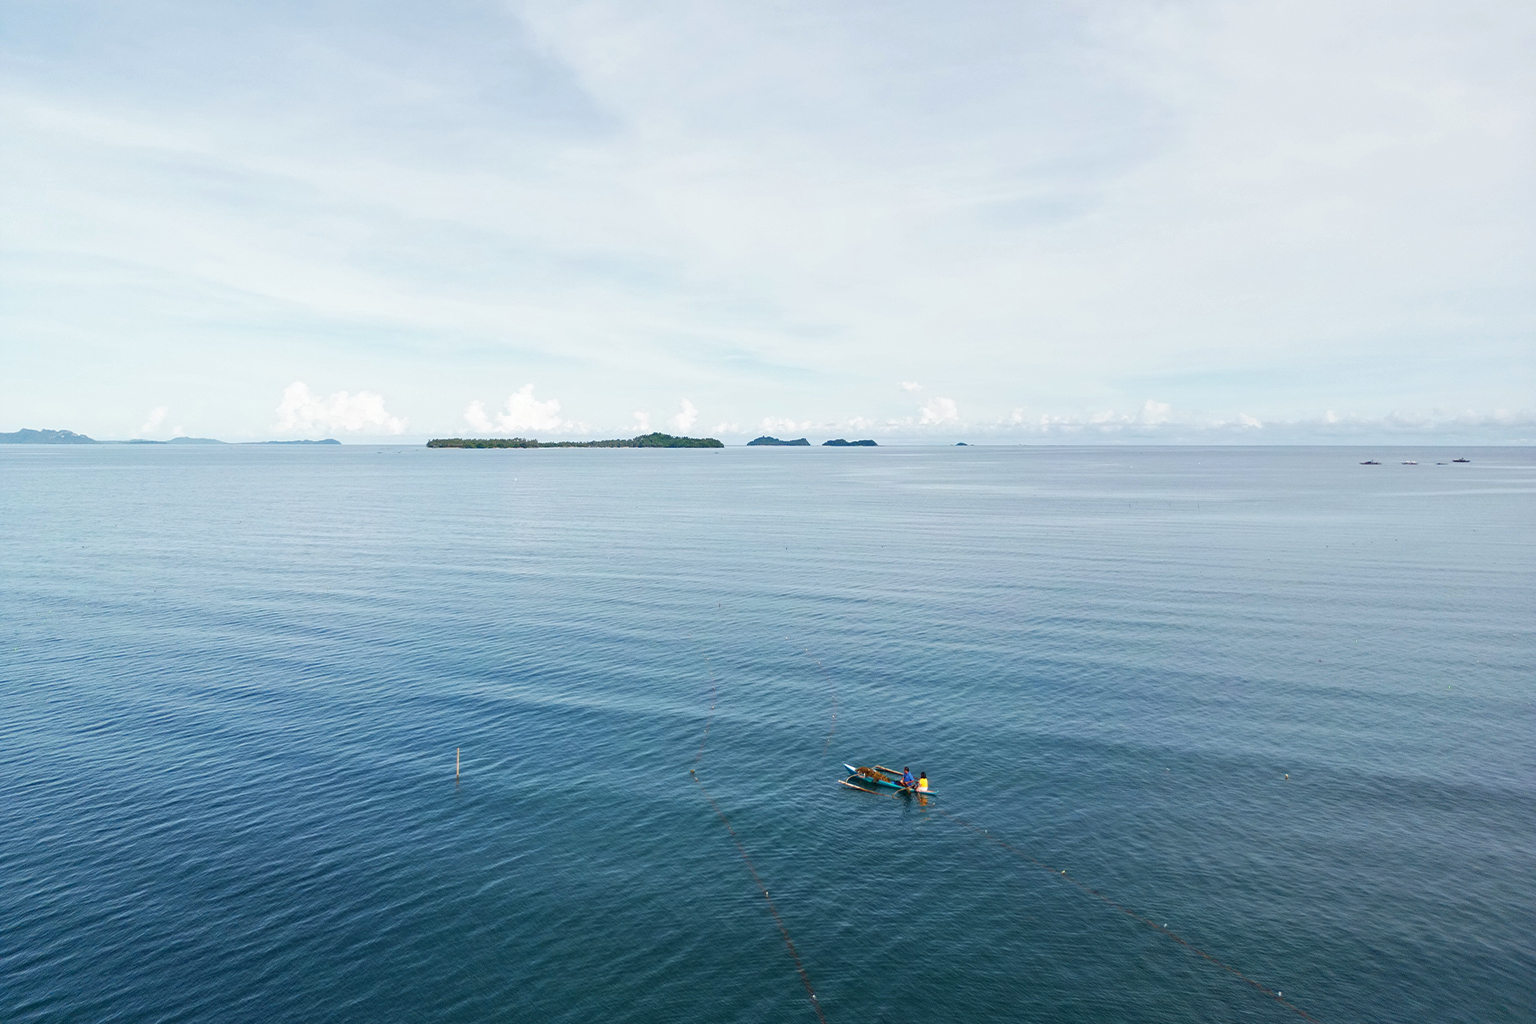 The Gimotea couple drops seaweed lines in their 2,500-square meter (0.62-acre) farm